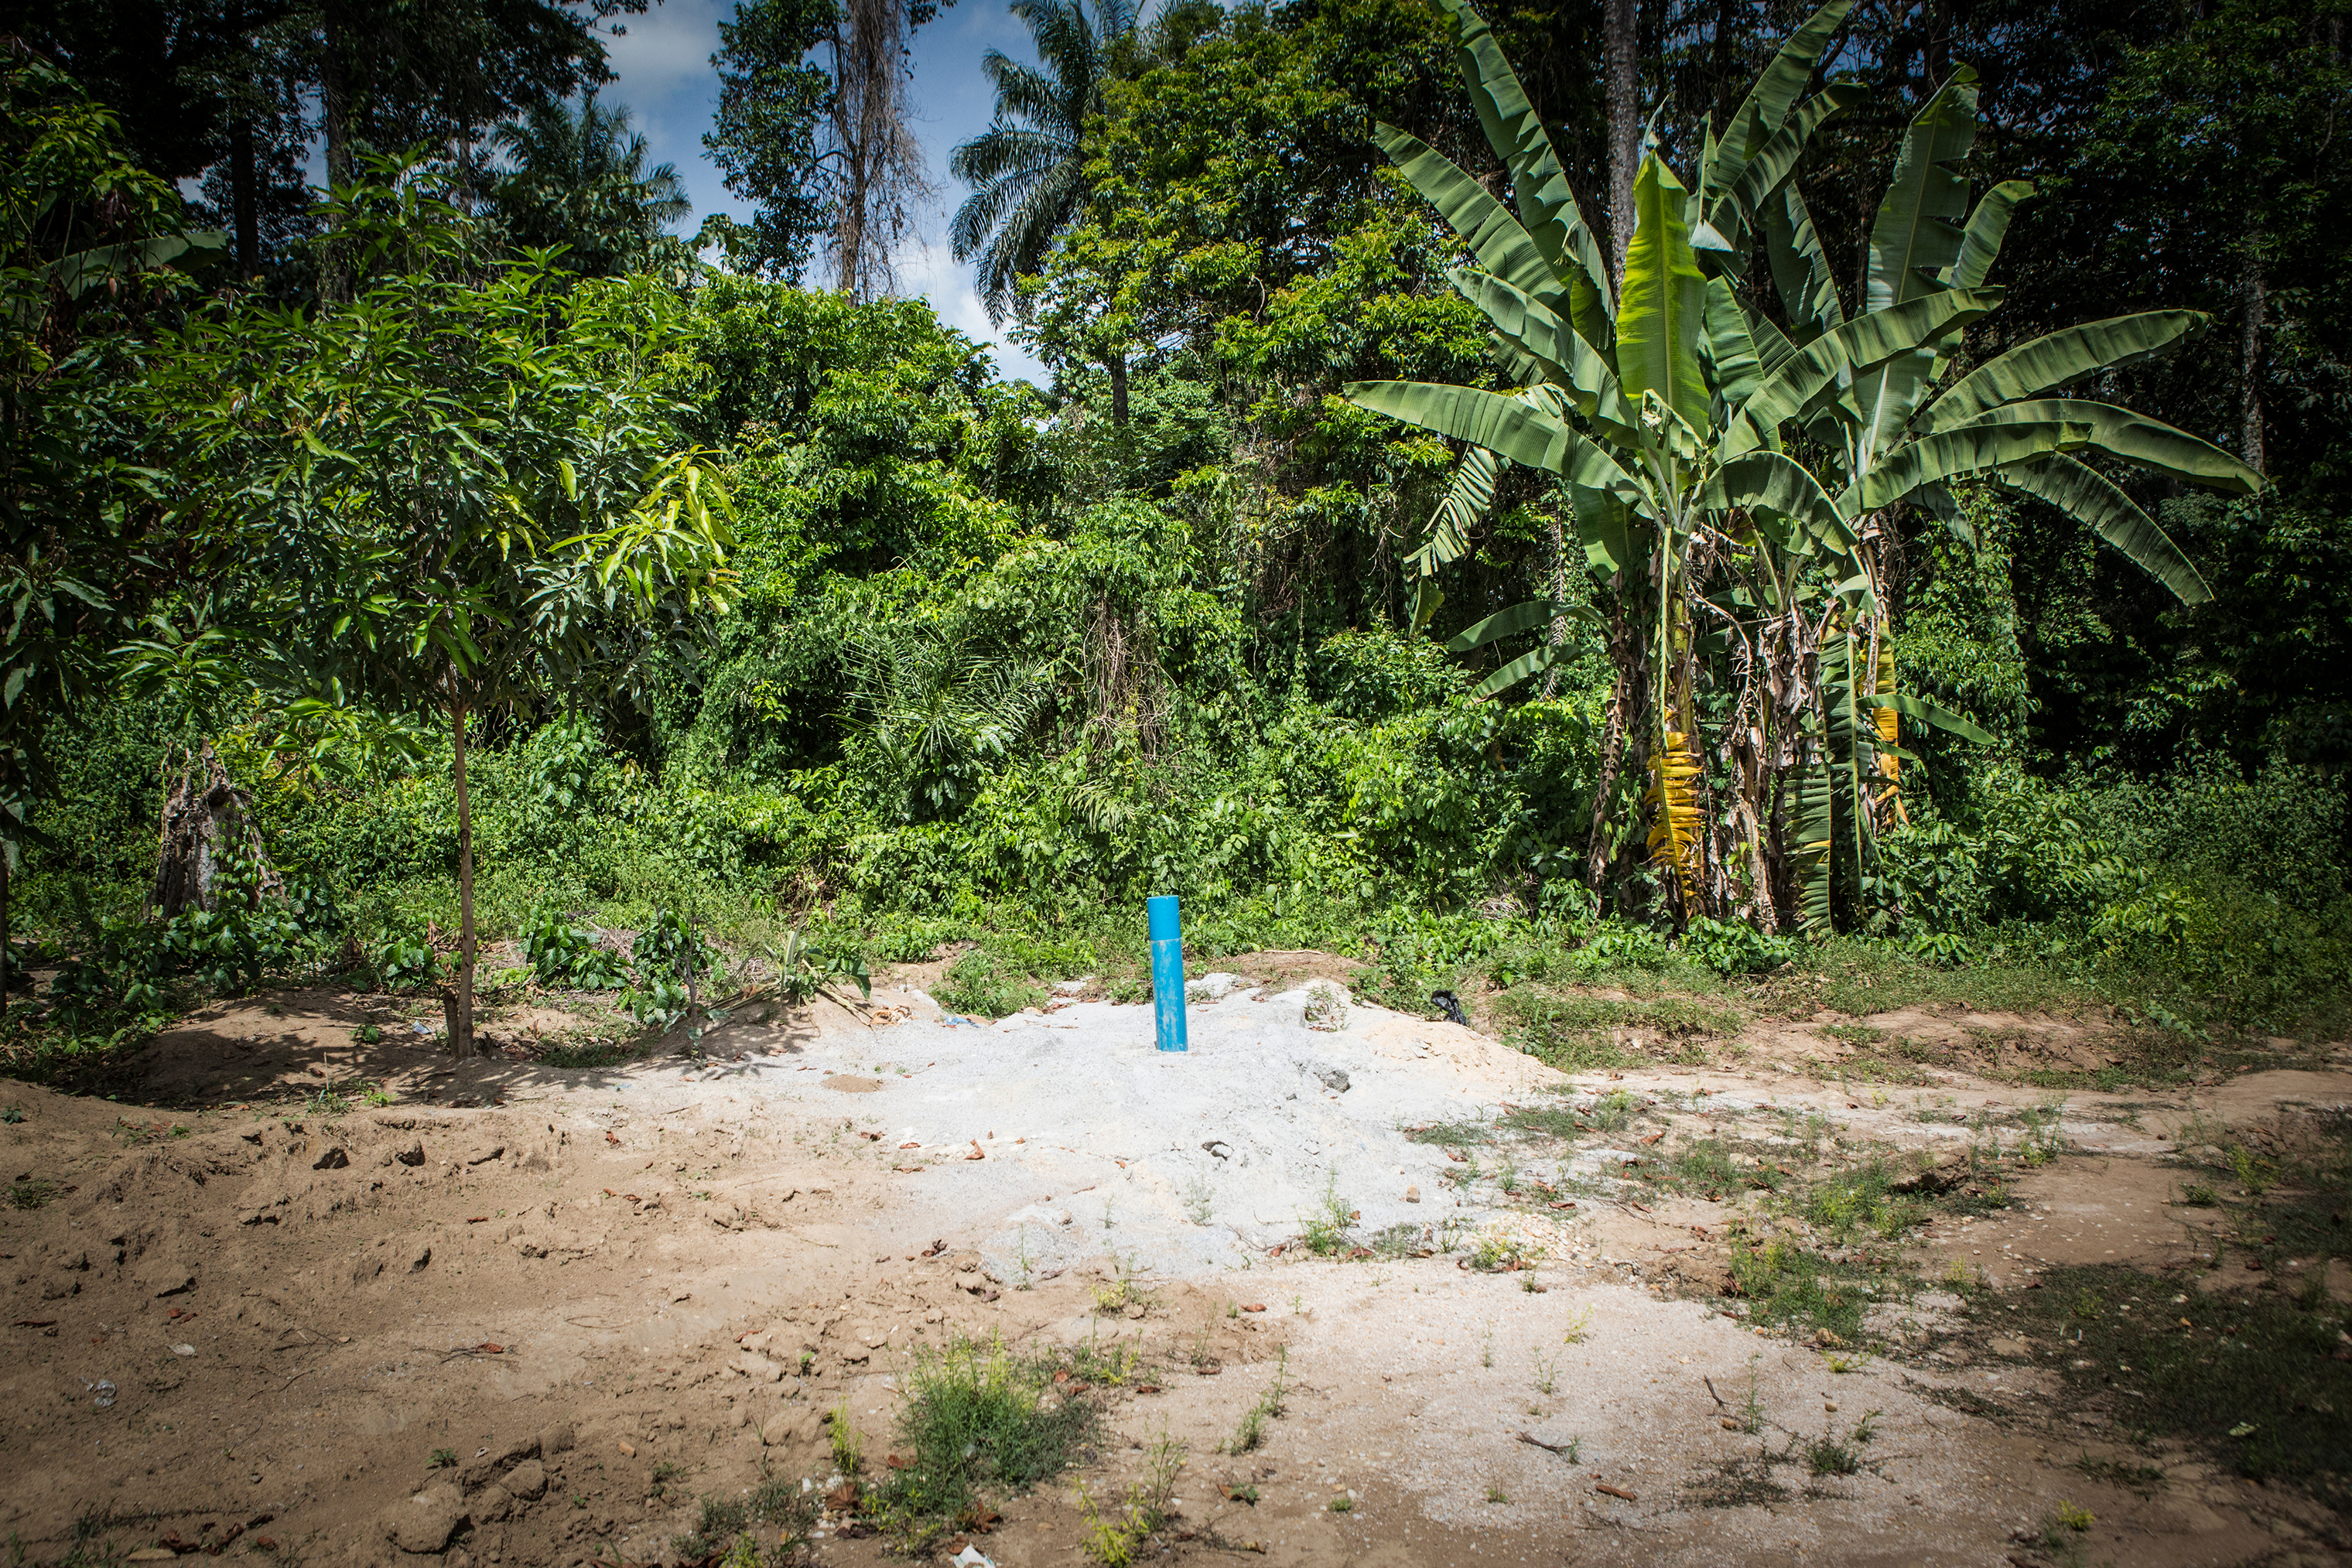 An incomplete bore hole in Koryardu that was dug in April but remains unfinished in mid-May. (Jane Hahn for TIME)